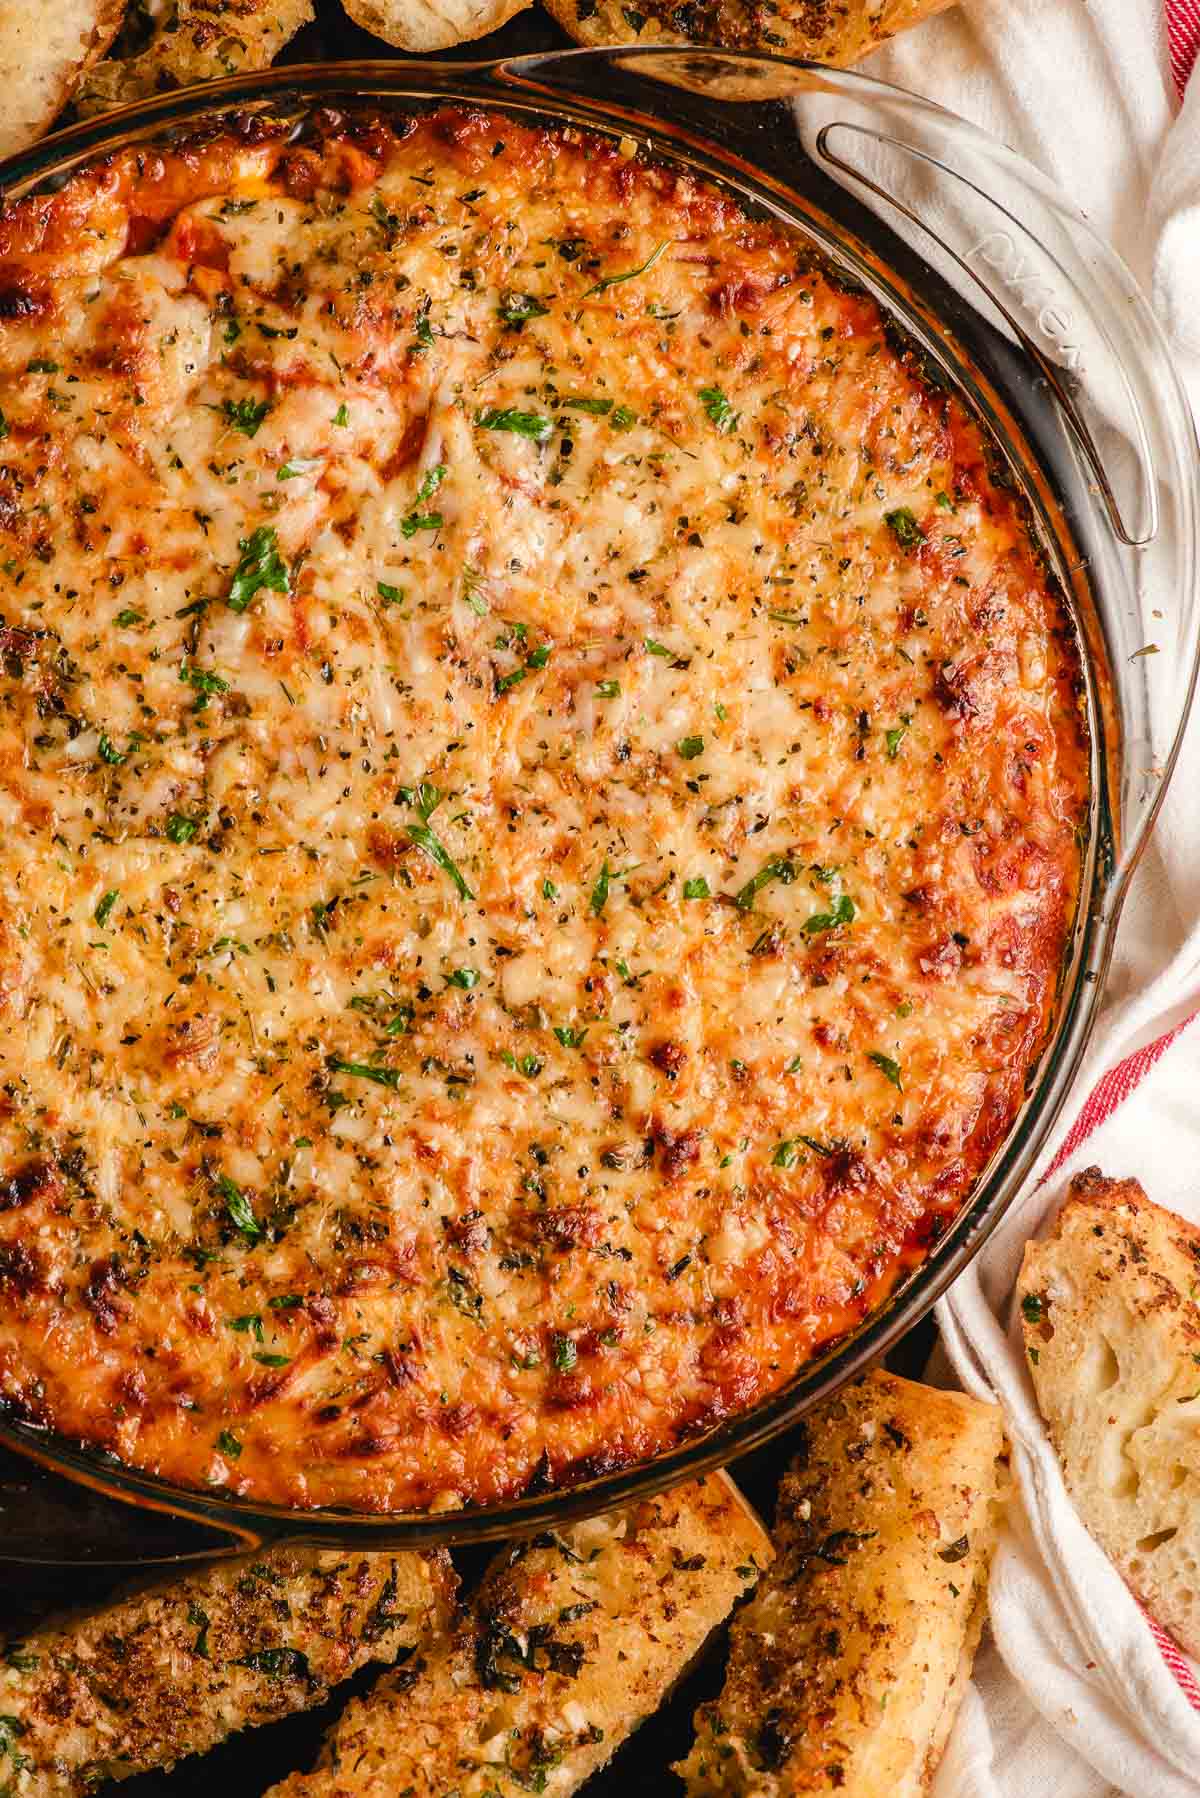 Hot baked lasagna dip in a glass pie dish with garlic specie dippers on the side.